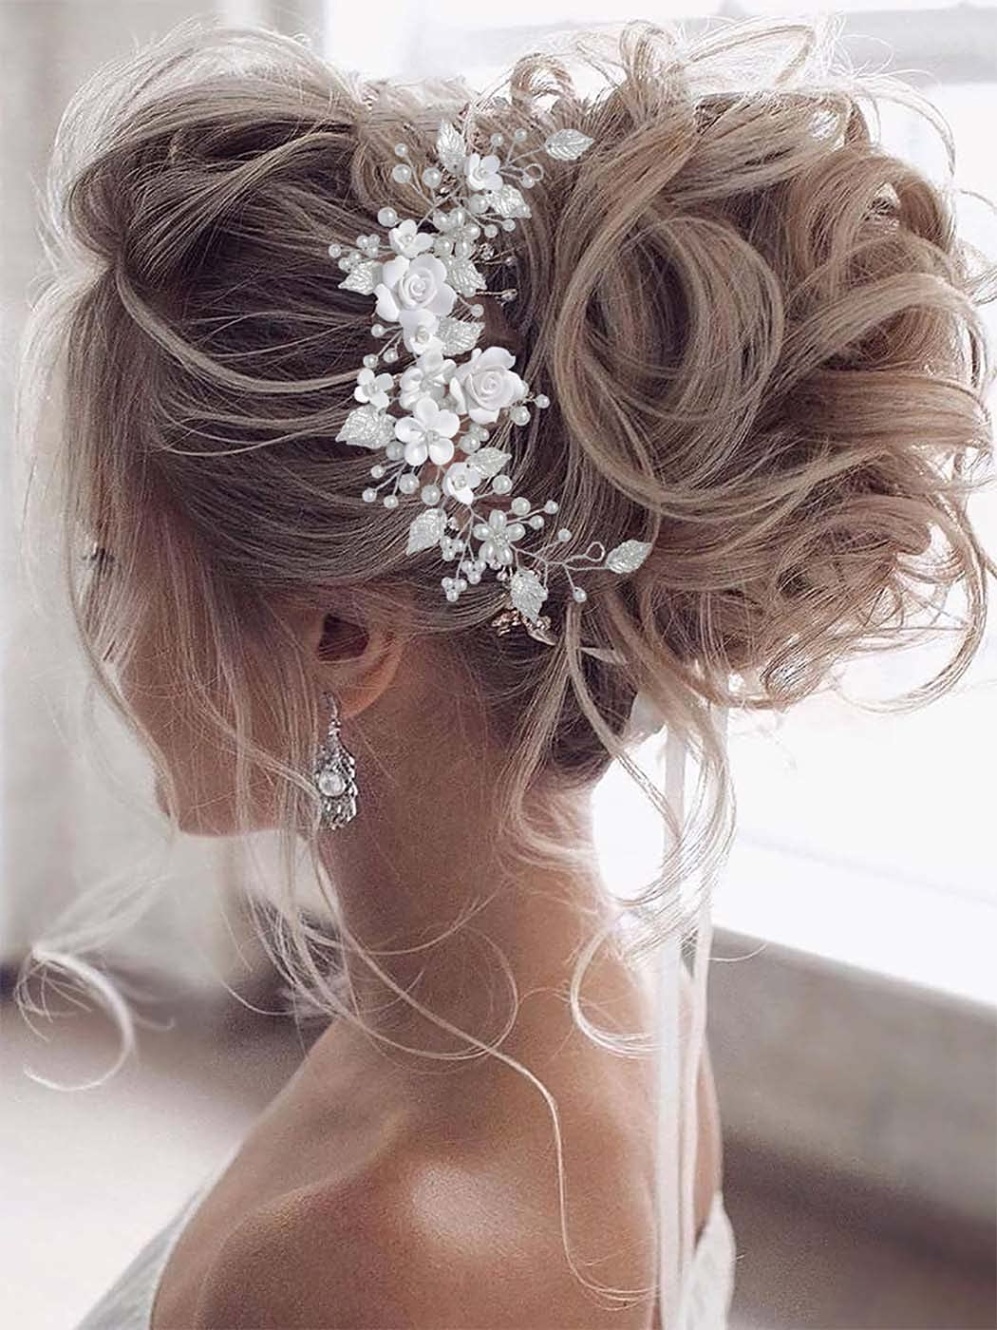 Get Ready To Wow With Trendy Bride Hair Accessories!